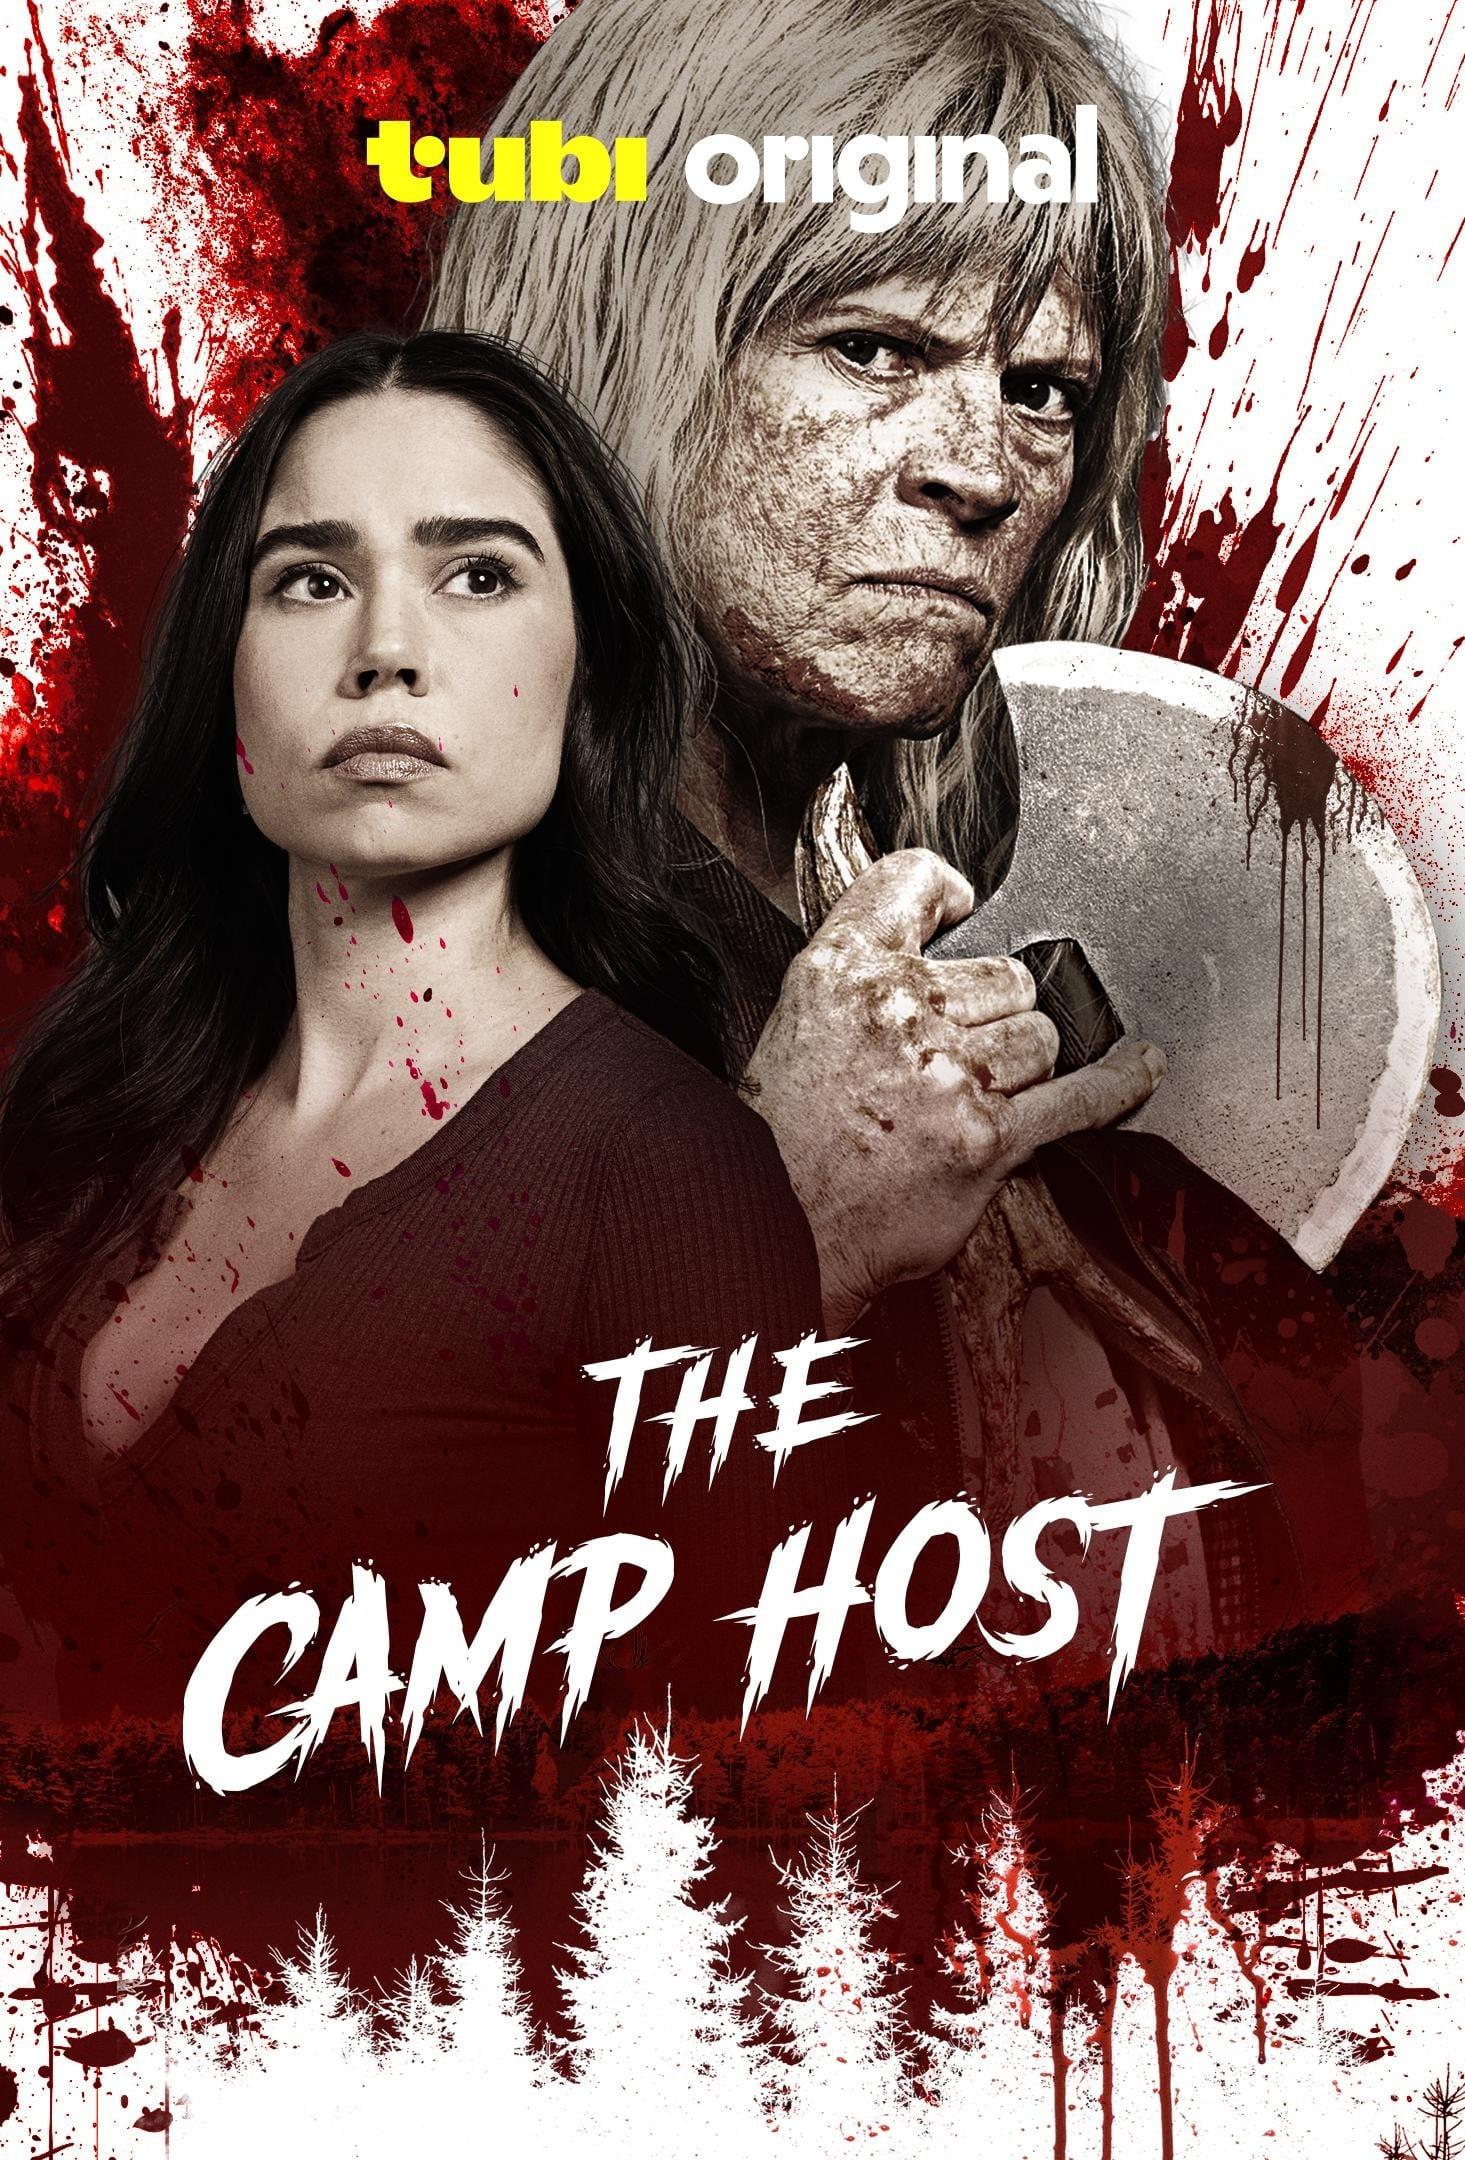 The Camp Host poster